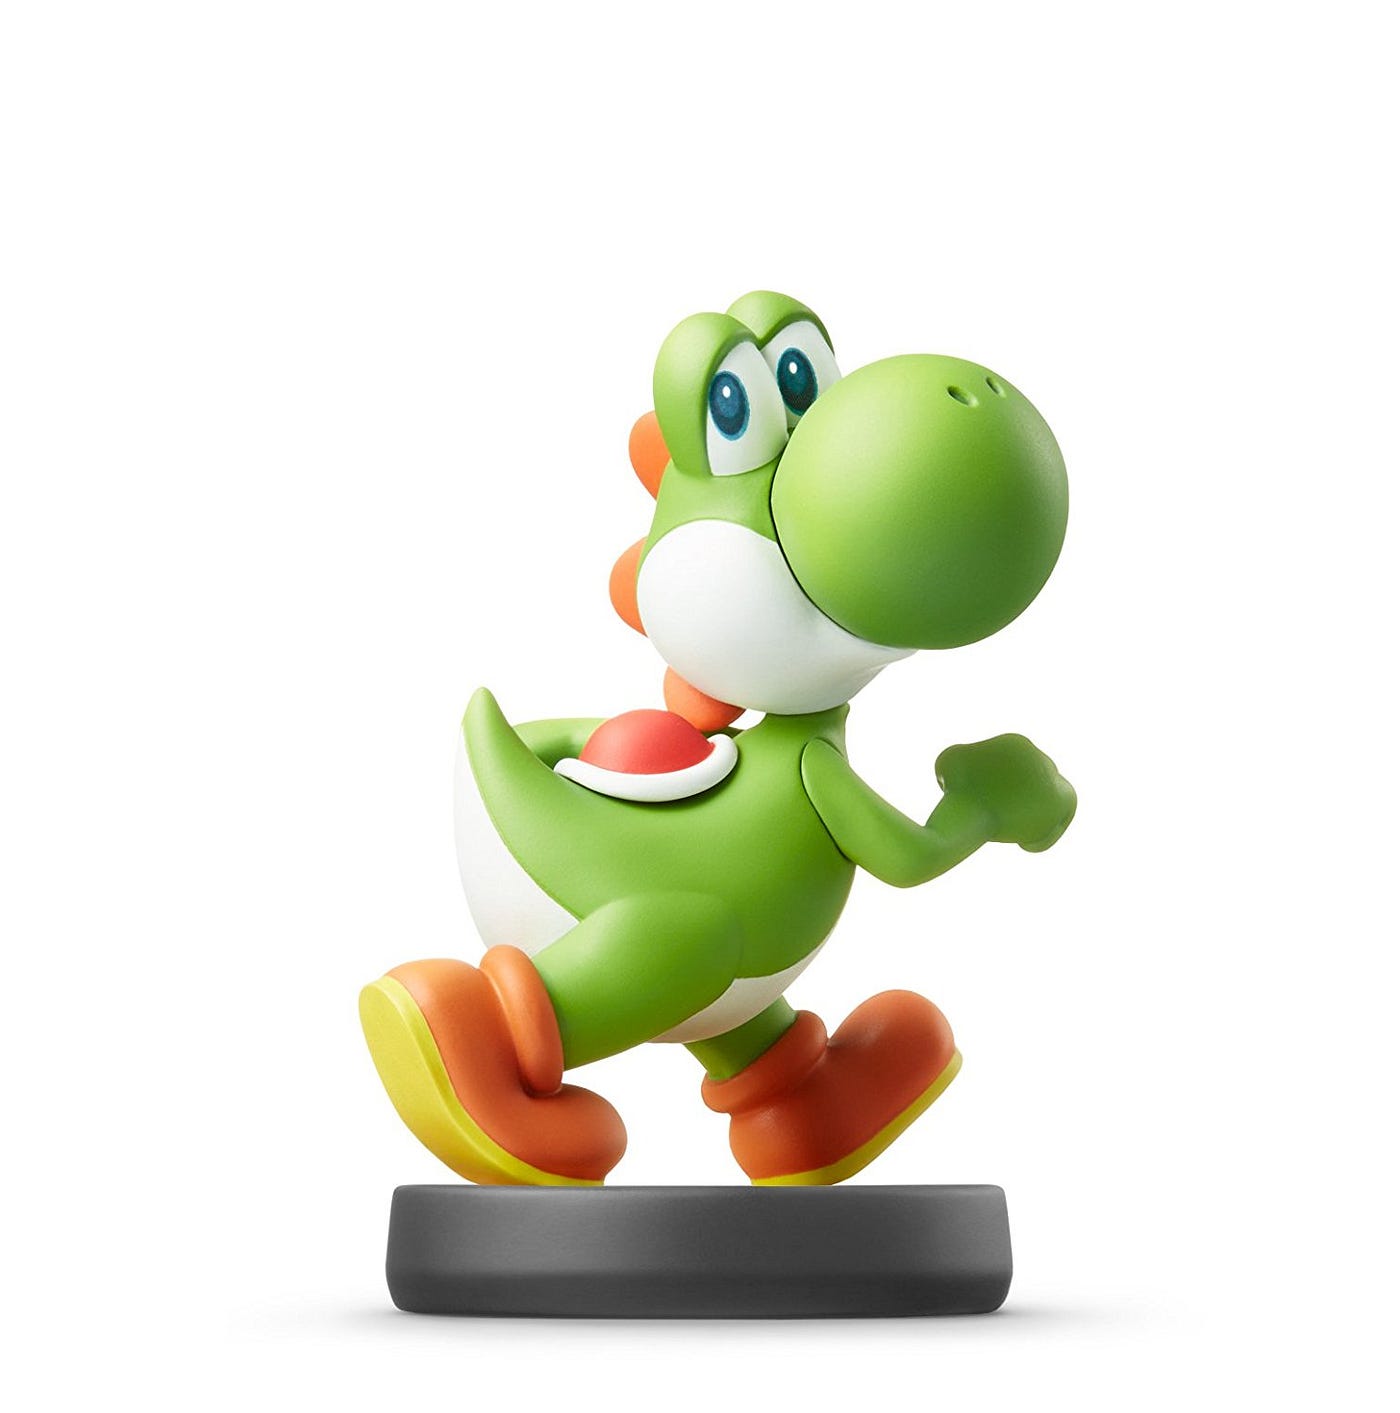 Modeling ready | Super Mario Bros. and Yoshi Figurines! ~ 3 in 1 Set!